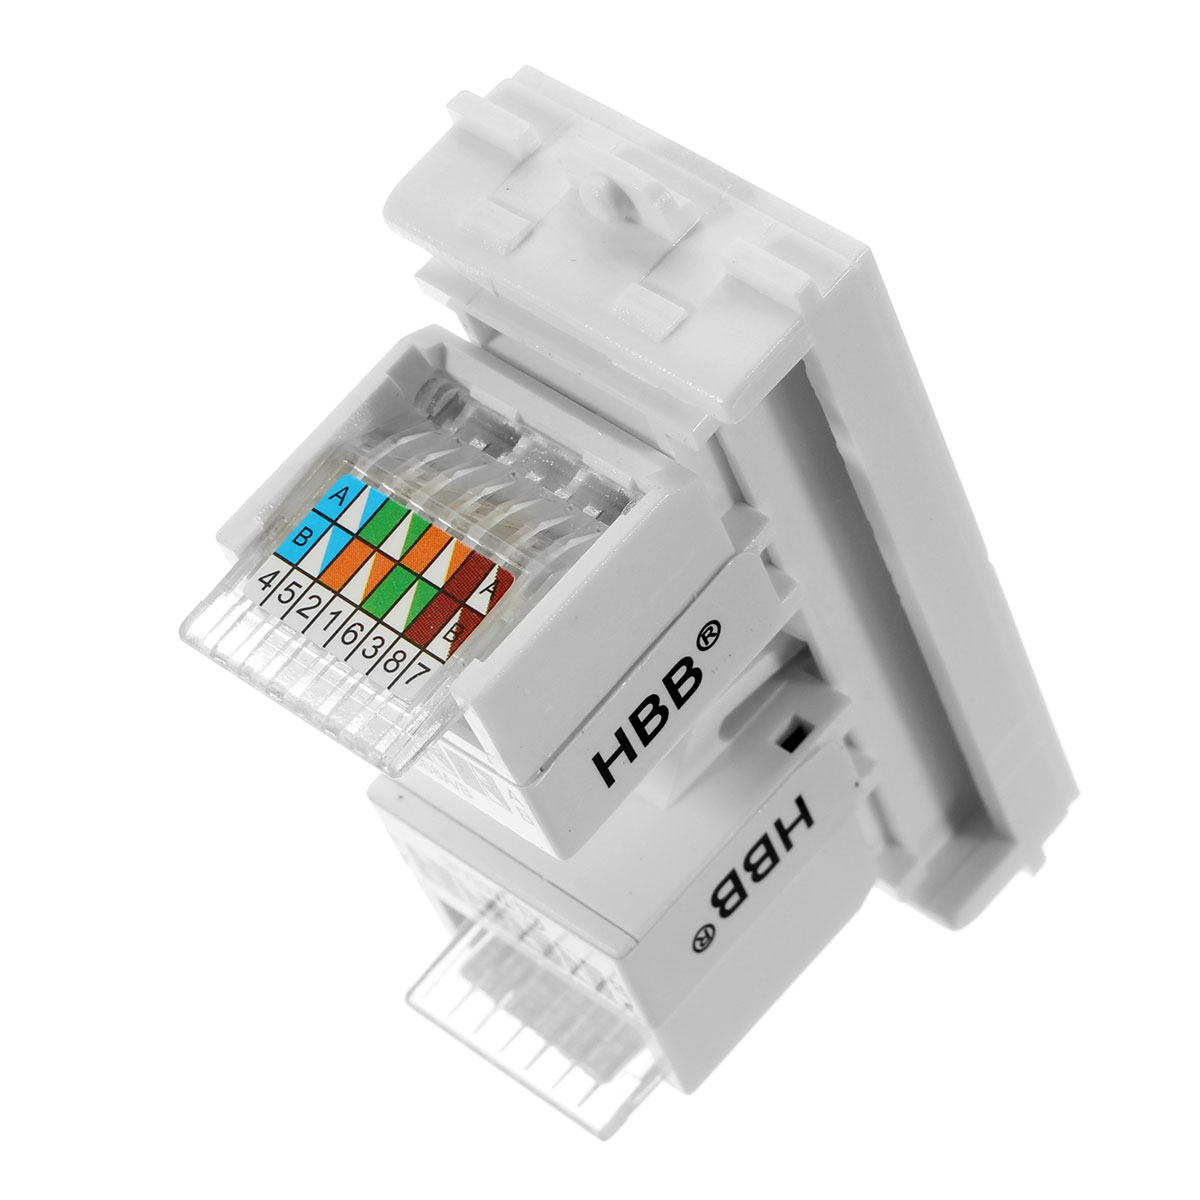 RJ45-Wall-Plate-Dual-Port-Socket-Panel-Building-Materials-Network-Combination-Connector-Module-1401148-9